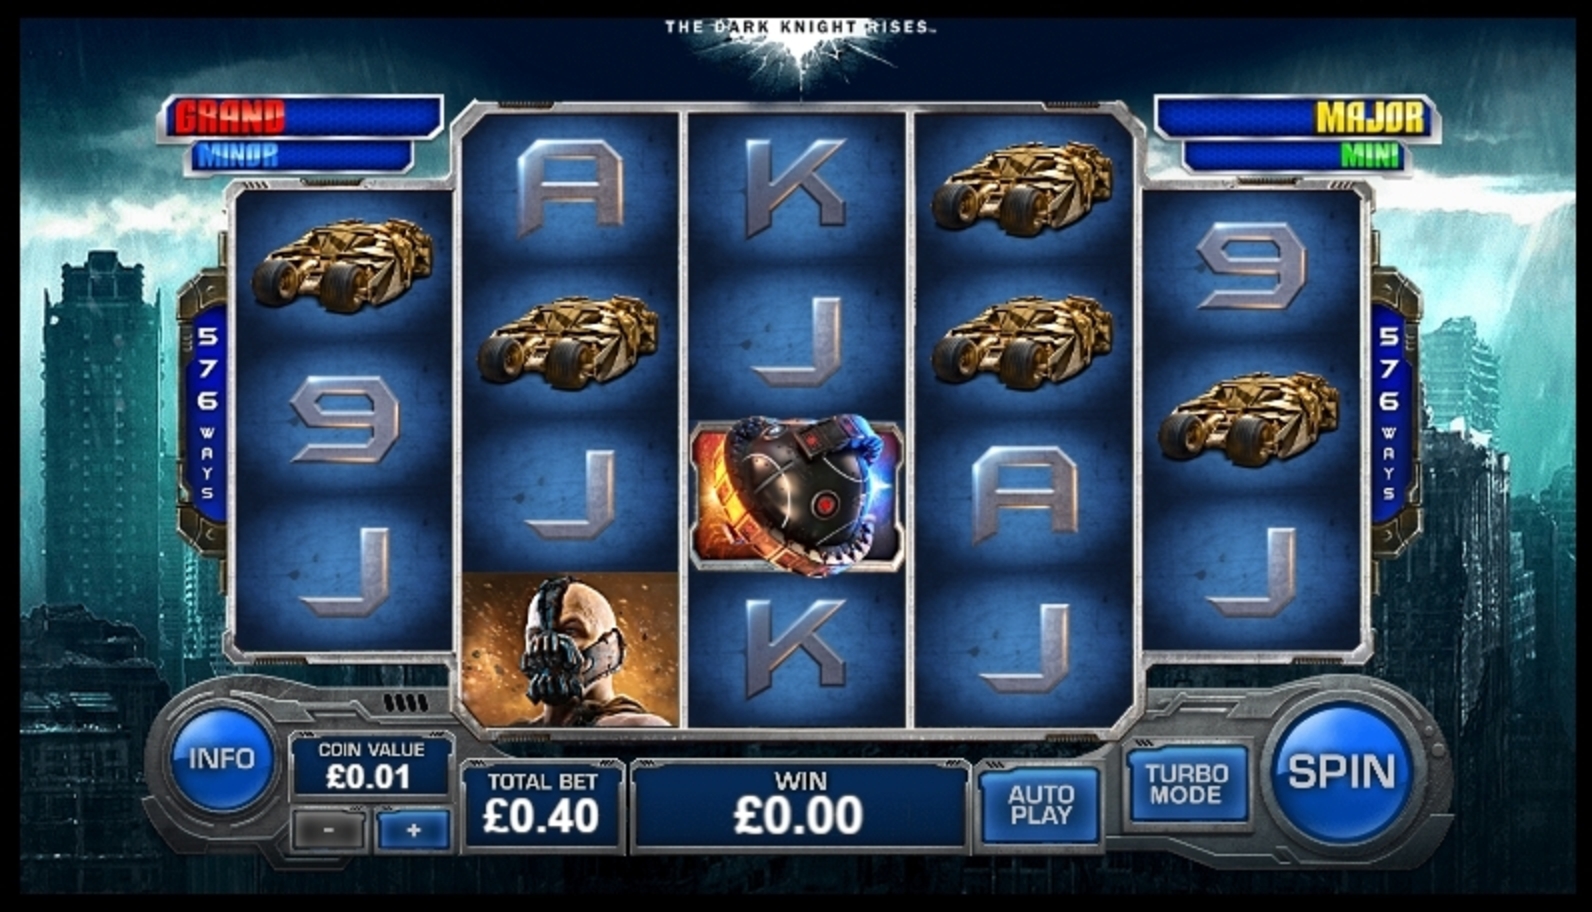 Reels in The Dark Knight Rises Slot Game by Microgaming